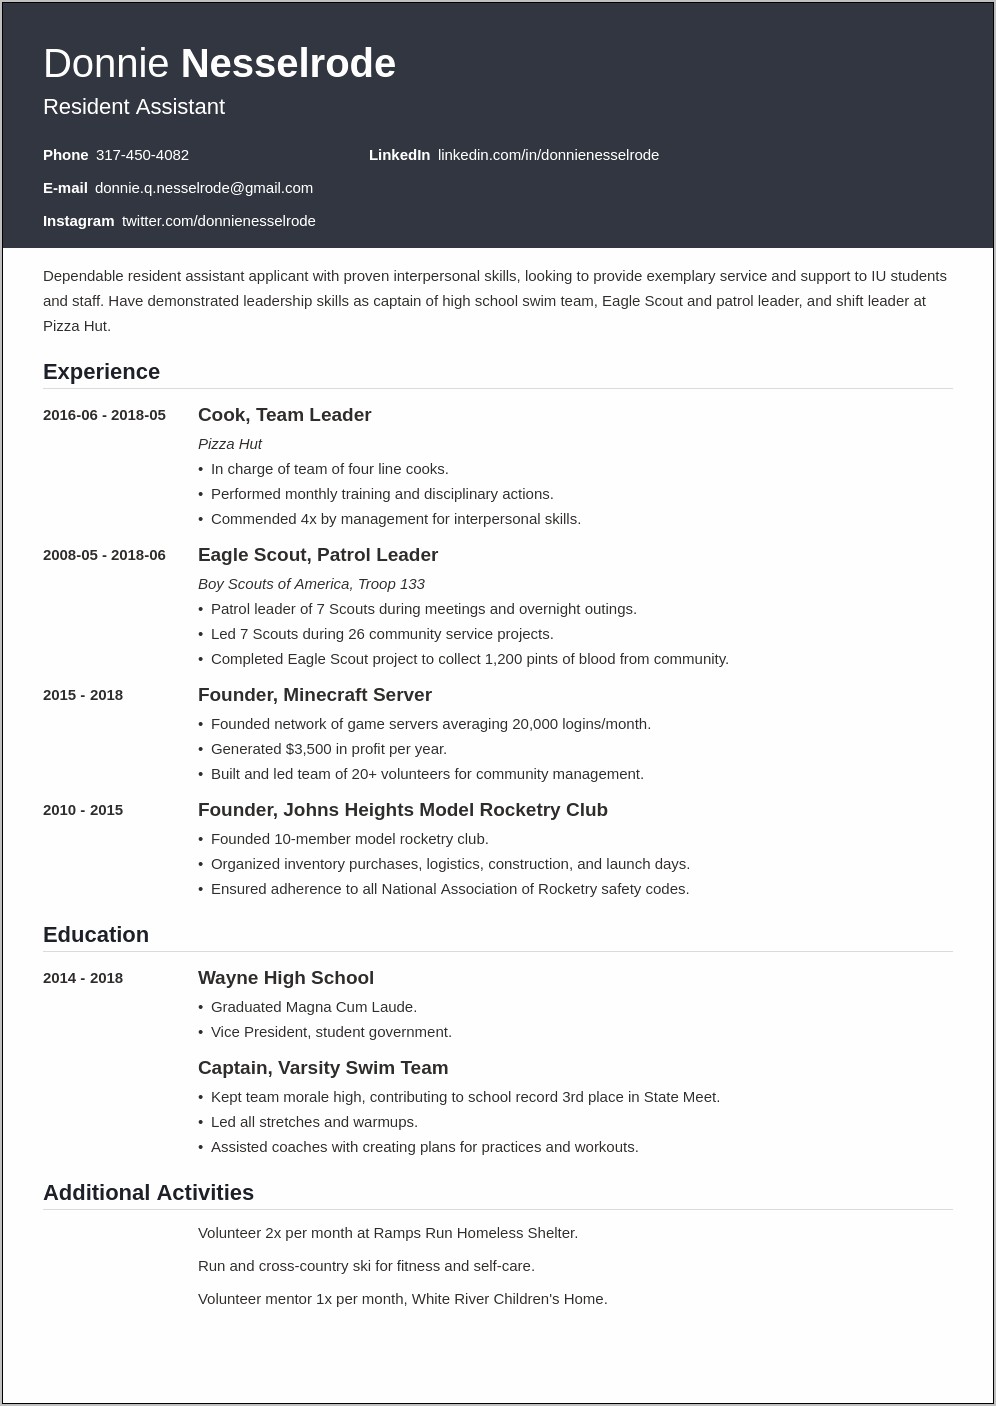 Resident Assistant Resume Objective College